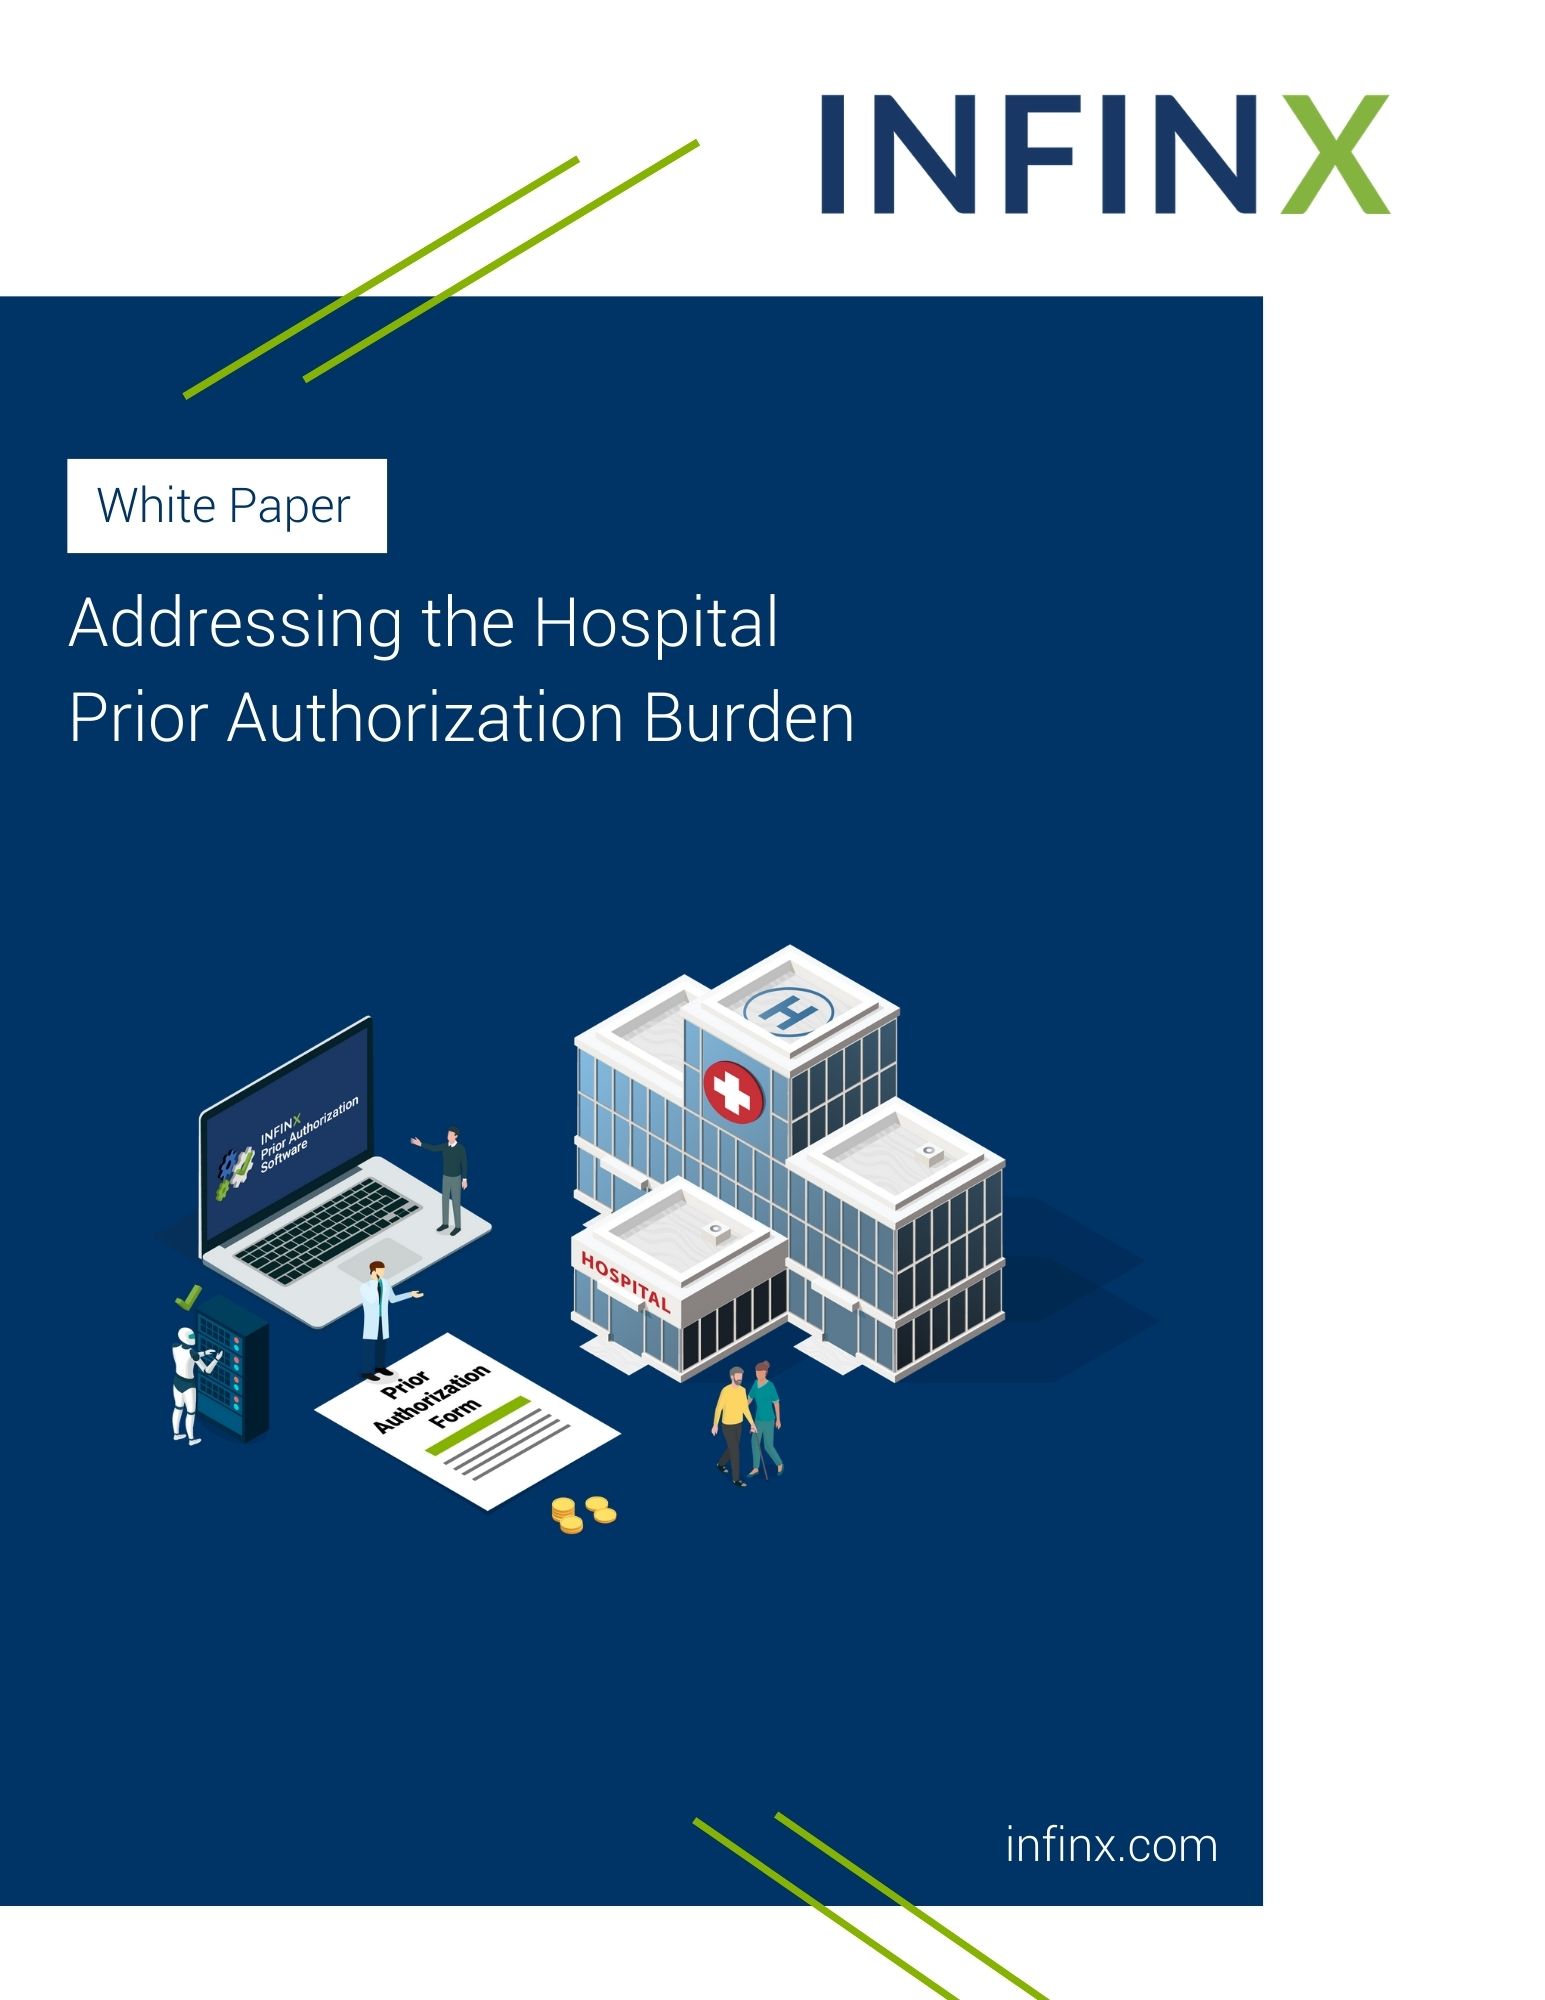 Infinx-WP-Addressing-the-Hospital-Prior-Authorization-Burden-May-10-2021-8